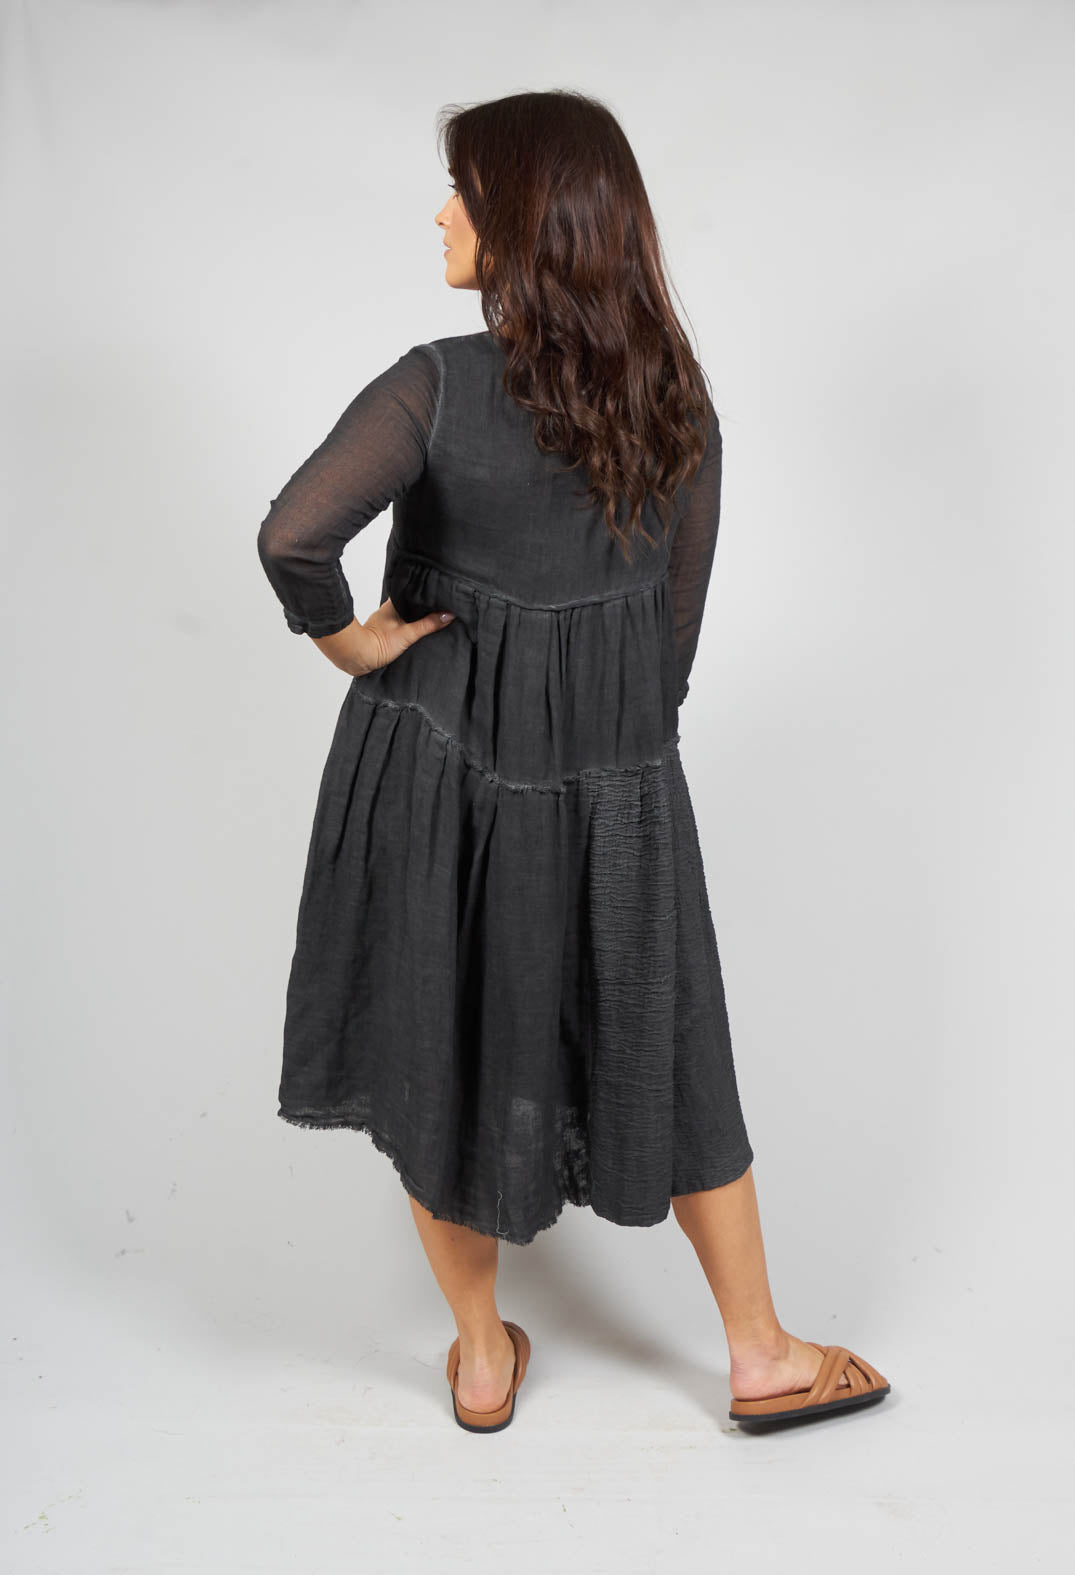 Roby Long Sleeved Dress in Black